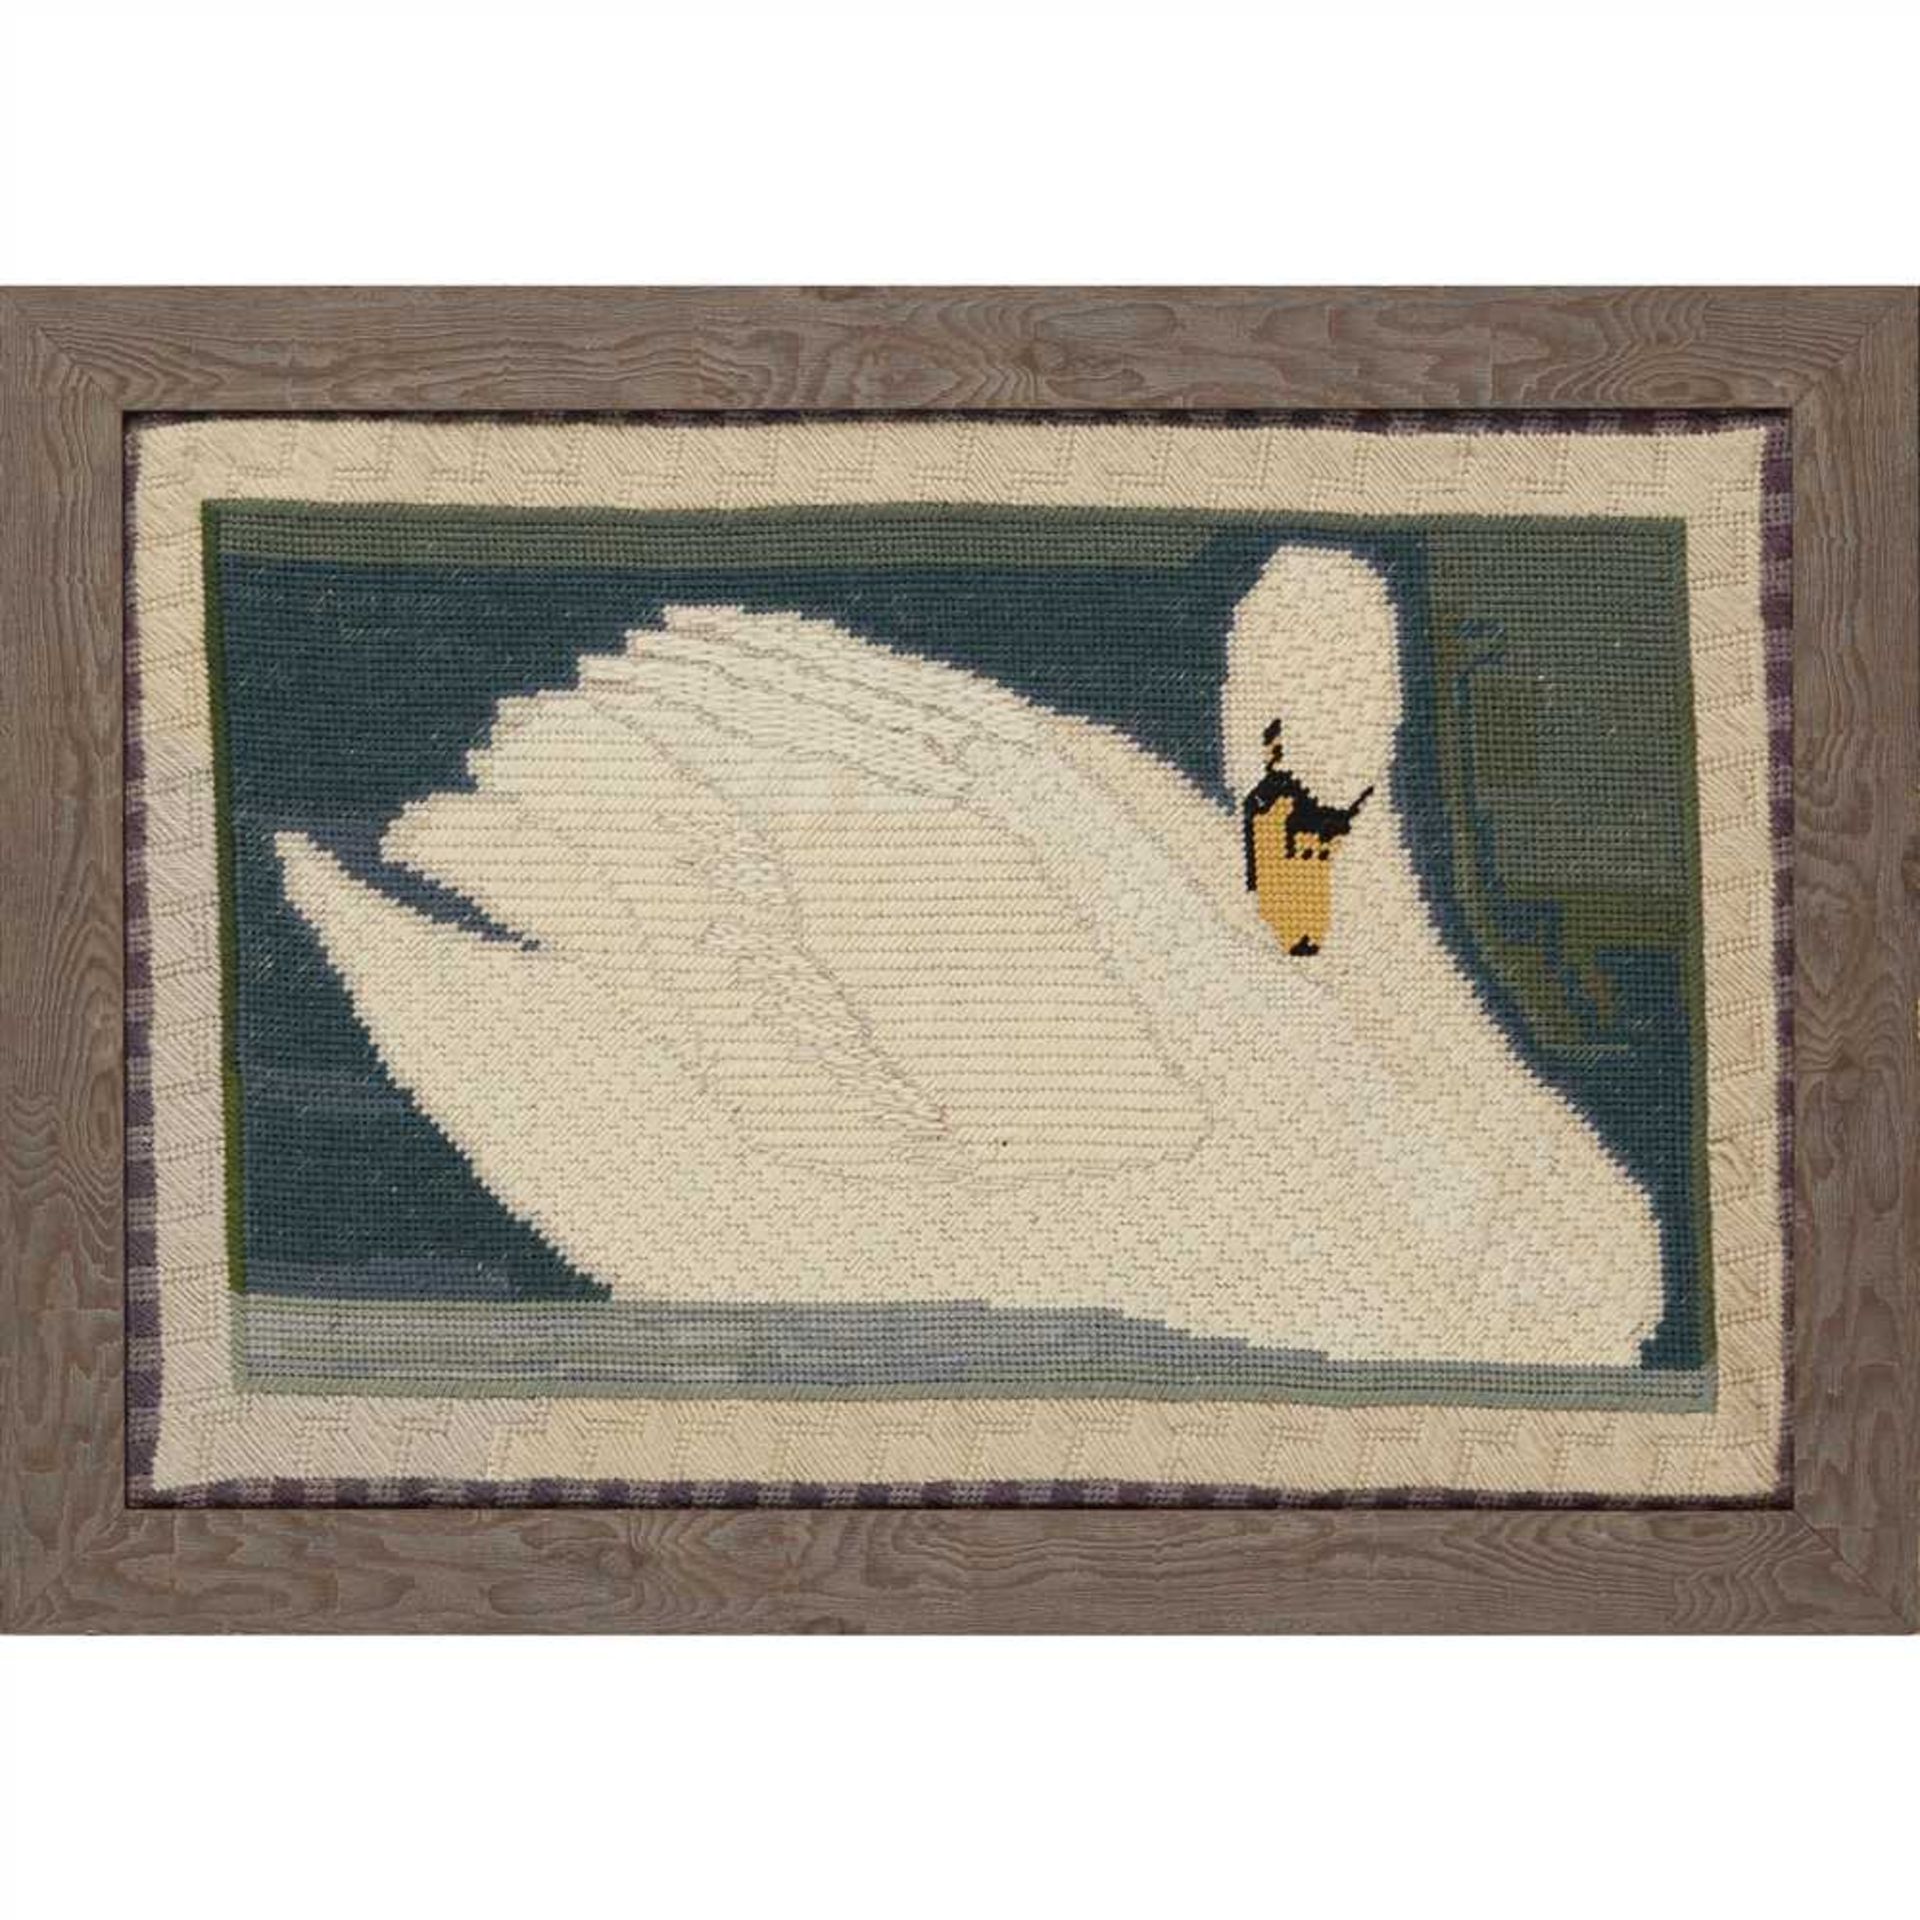 ENGLISH SCHOOL ARTS & CRAFTS EMBROIDERED WOOLWORK PANEL, CIRCA 1900 depicting a swan, coloured